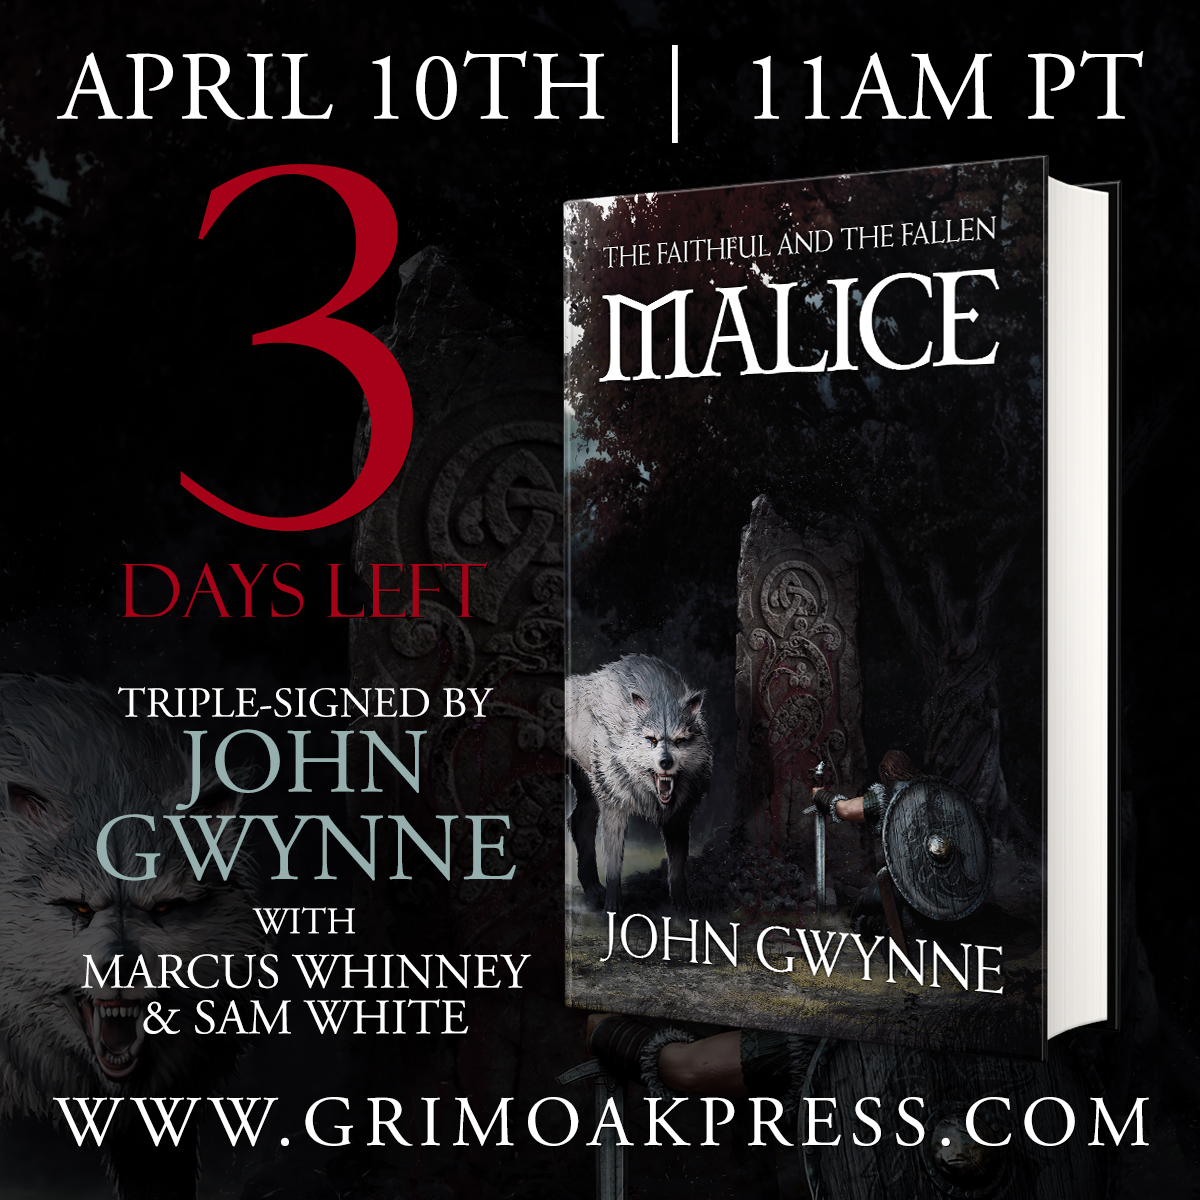 Just 3 days until the Grim Oak Press special edition of MALICE is available for pre-order. Signed, numbered and lettered editions packed with amazing artwork from the exceptionally talented Marcus Whinney and Sam White. @ShawnSpeakman @GrimOakPress @artbysamwhite @julieacrisp